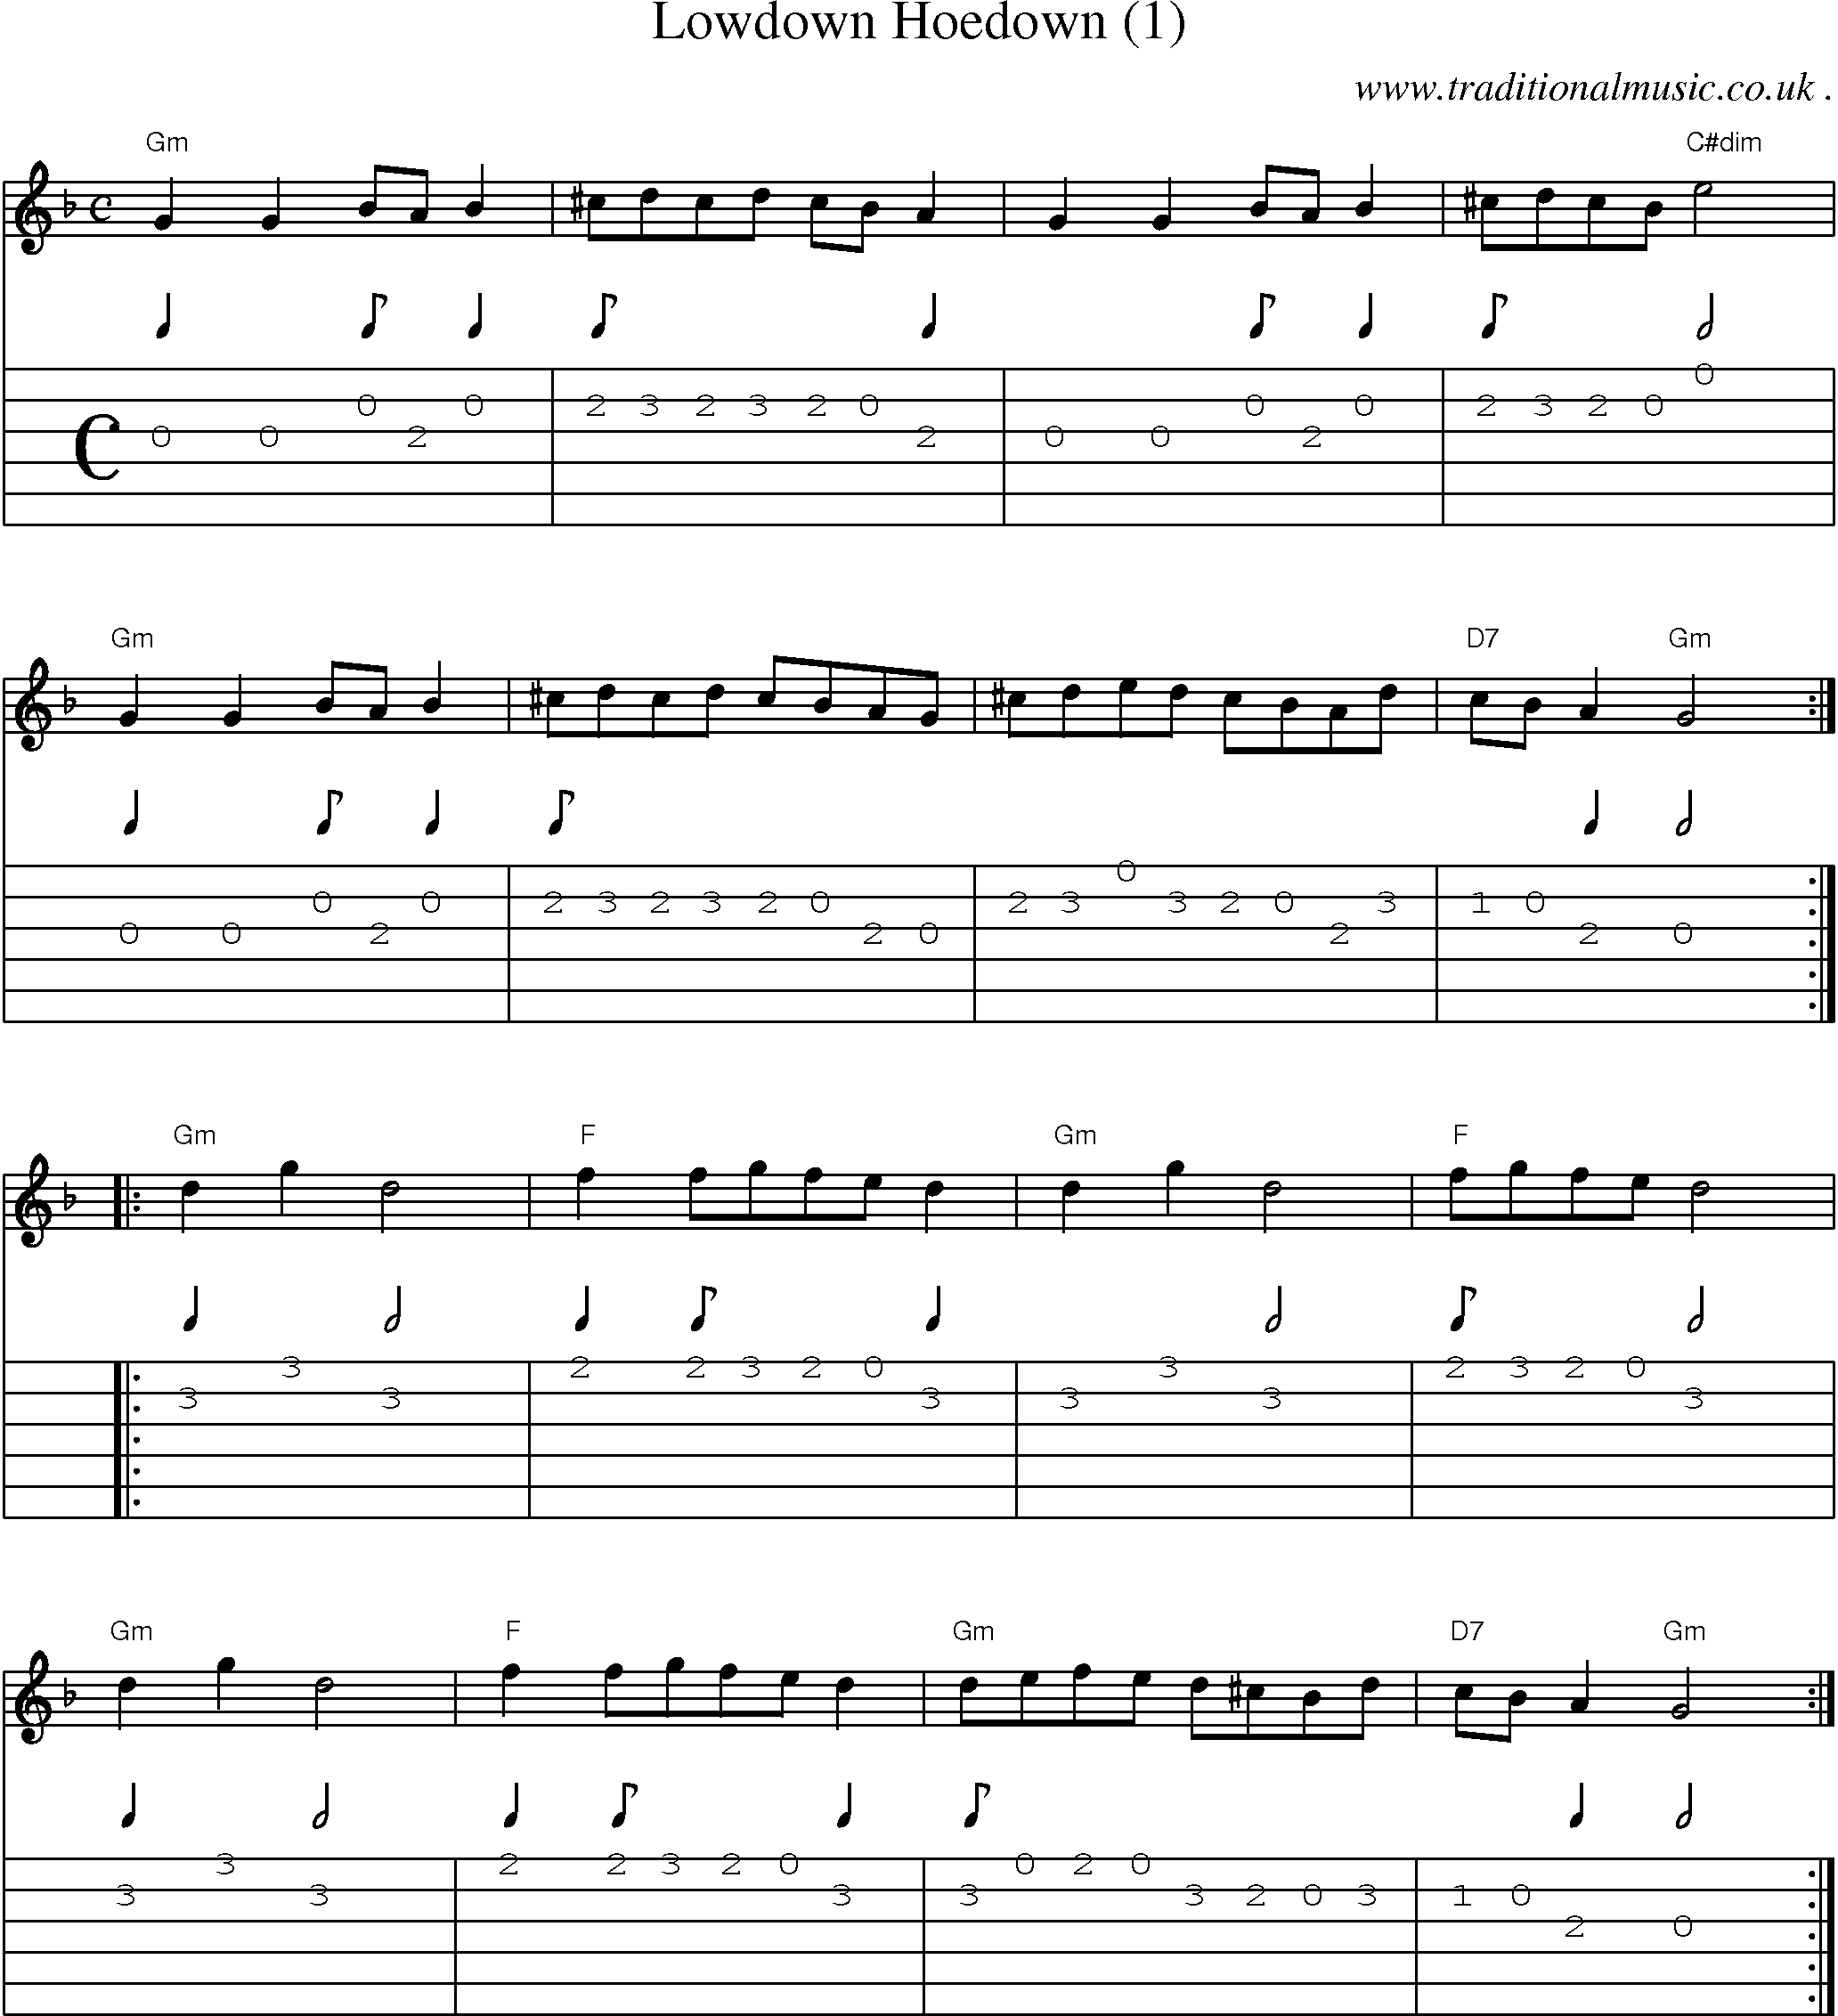 Music Score and Guitar Tabs for Lowdown Hoedown (1)